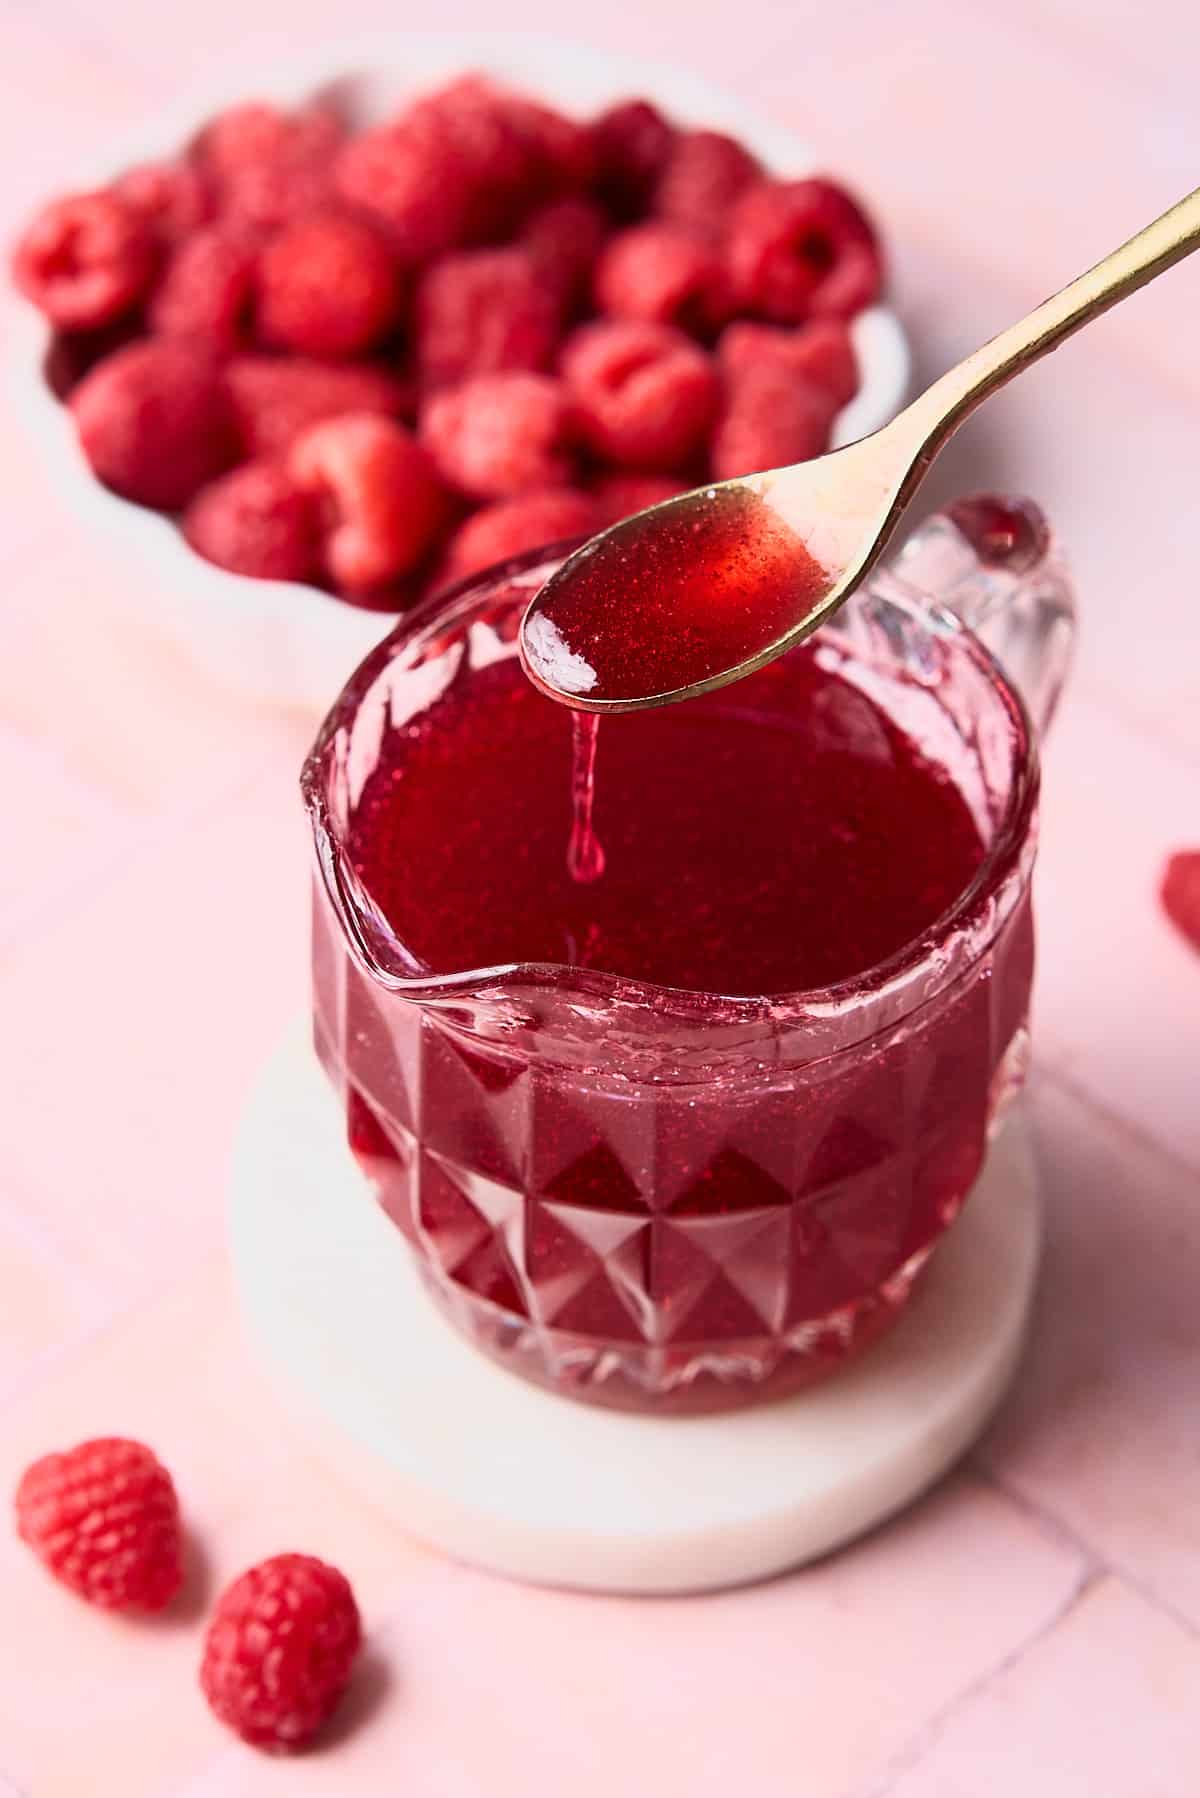 Delicious red raspberry syrup in a decorative glass being held by a spoon.